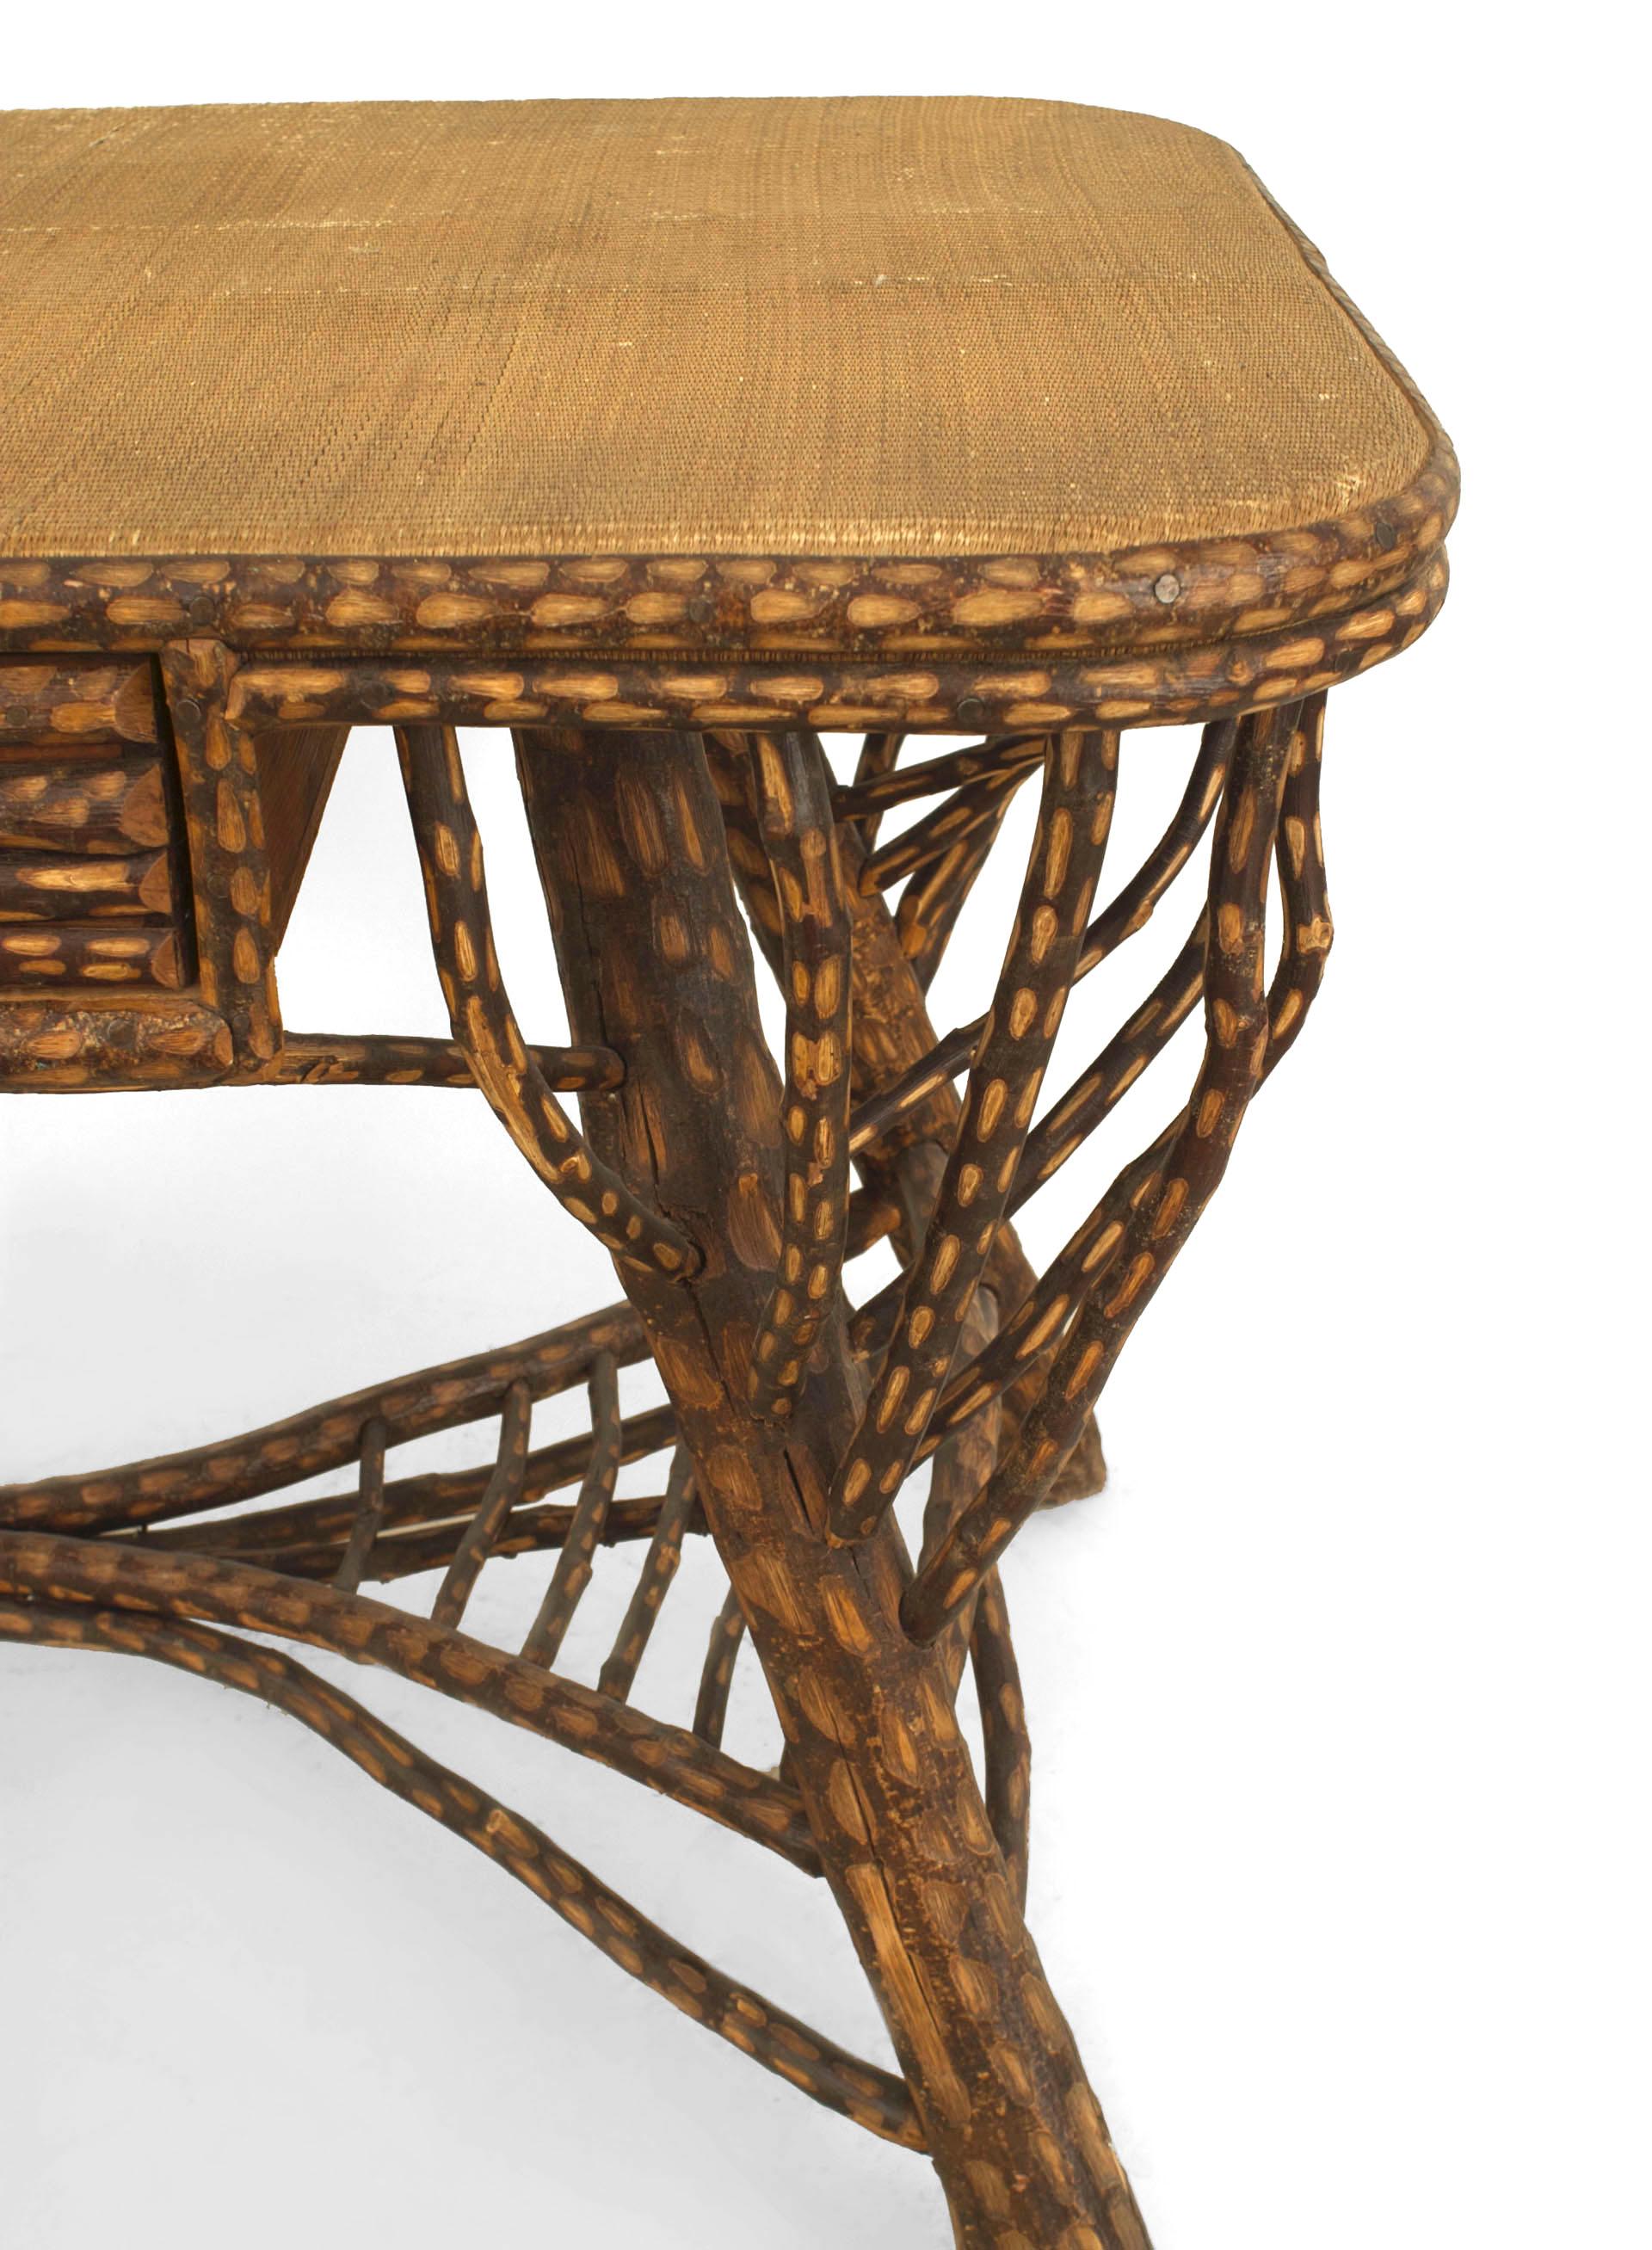 19th Century American Rustic Twig Table Desk with a Woven Top